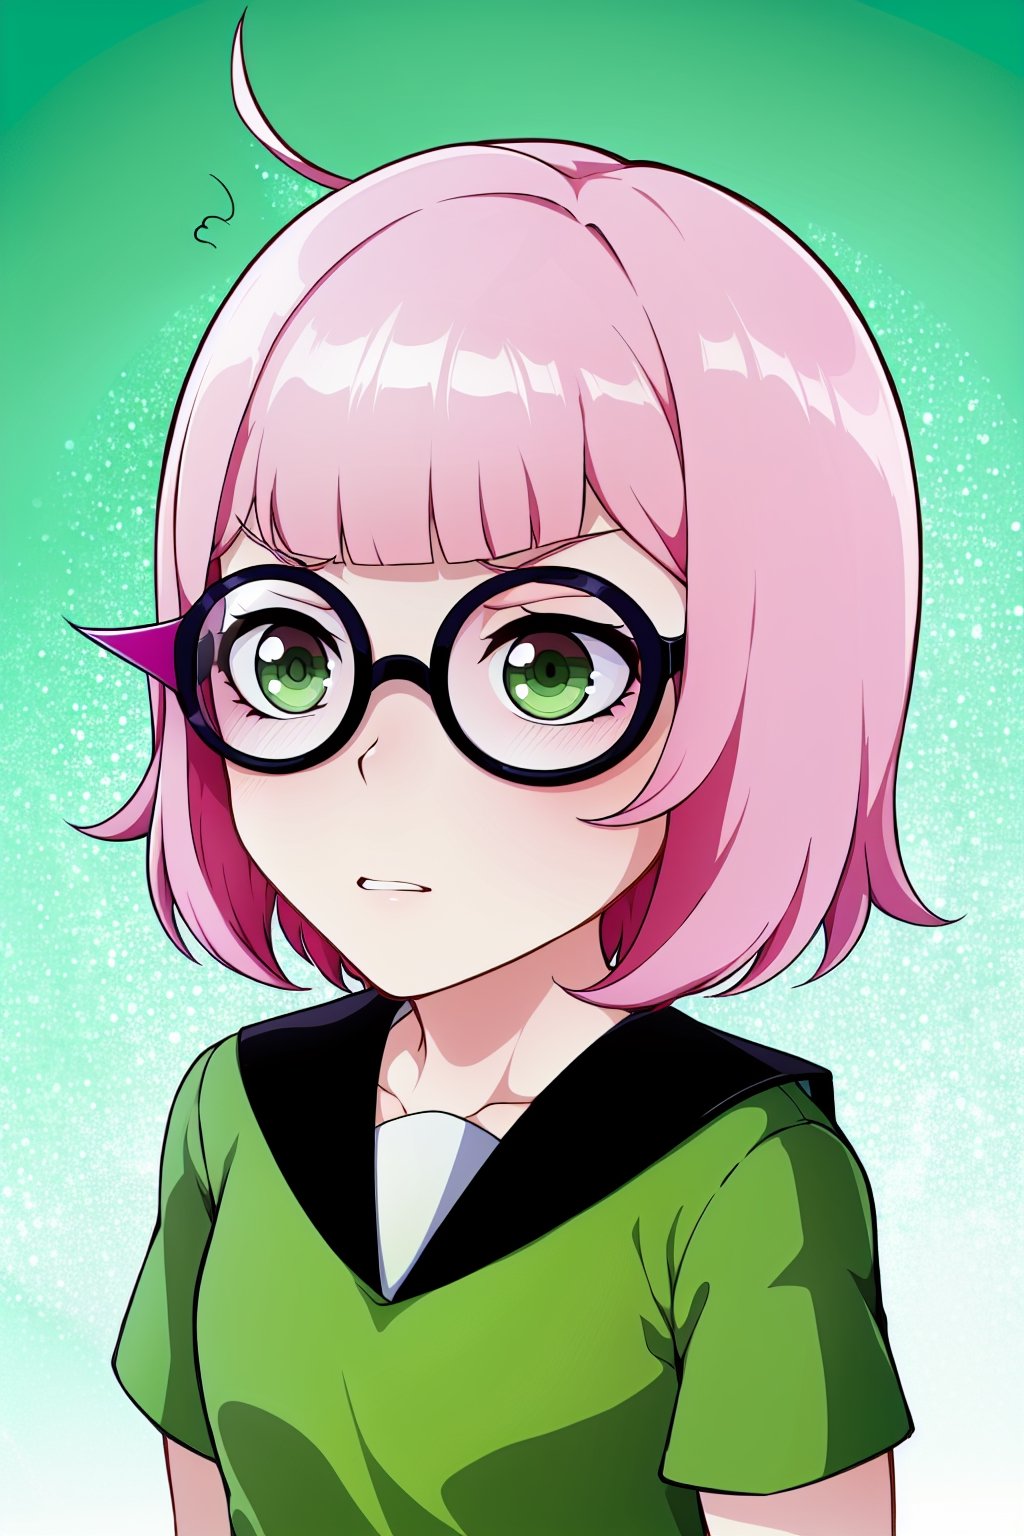 1 girl, solo, Saiki Kusuo, pale pink hair, disheveled hair, sharp hair, short hair, spiky hair, prickly bangs, emotionless face, calm face, no emotions, cold face, Japanese school uniform, short green skirt, white shirt with short arms, green shirt collar, oval glasses, thin-rimmed glasses, black frames, matte lenses, the eyes are not visible behind the lenses of the glasses,

,